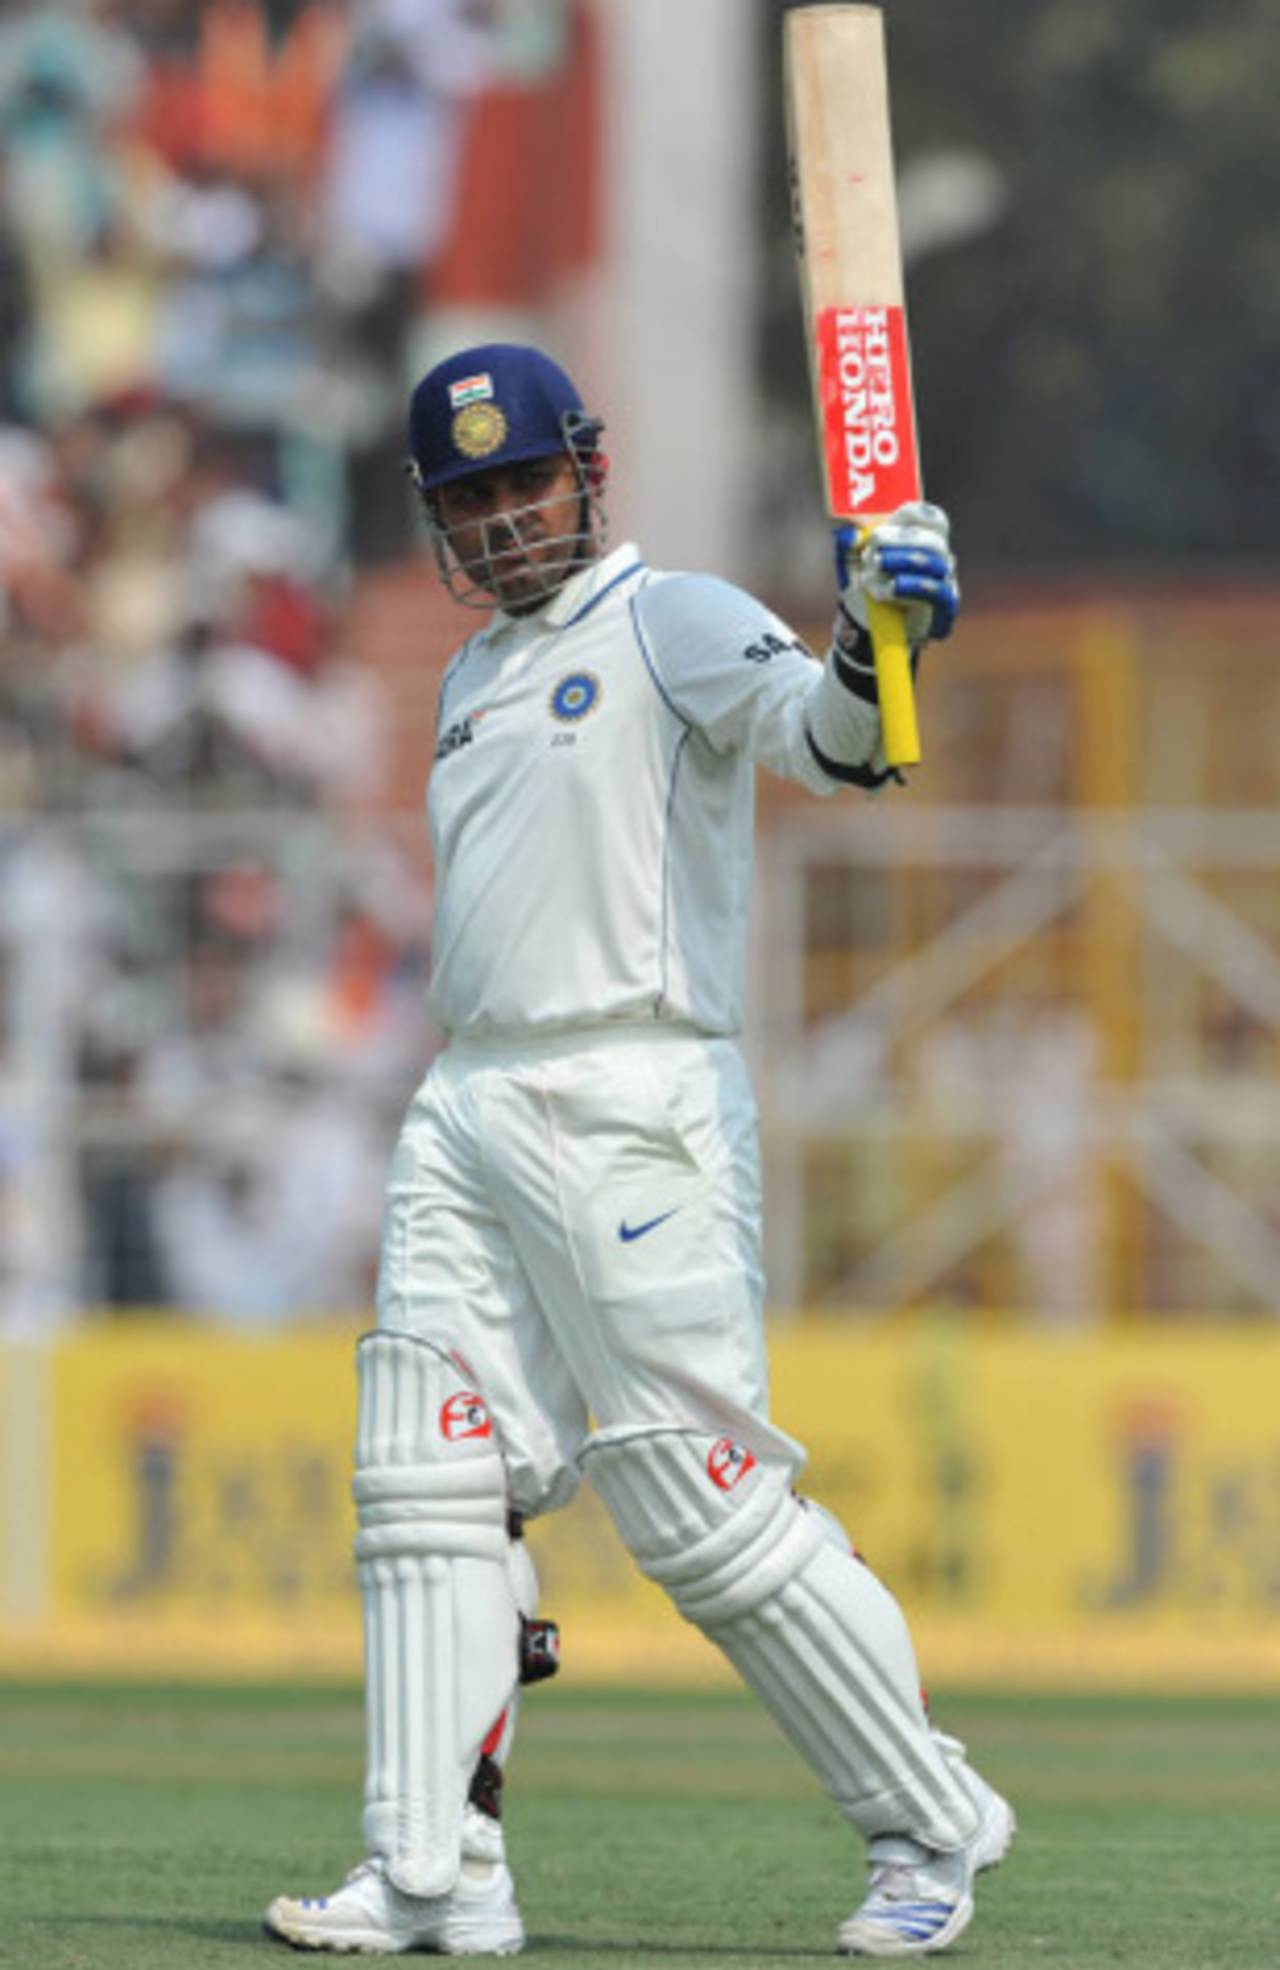 Virender Sehwag brings up a rapid fifty, India v South Africa, 2nd Test, Kolkata, 2nd day, February 15, 2010